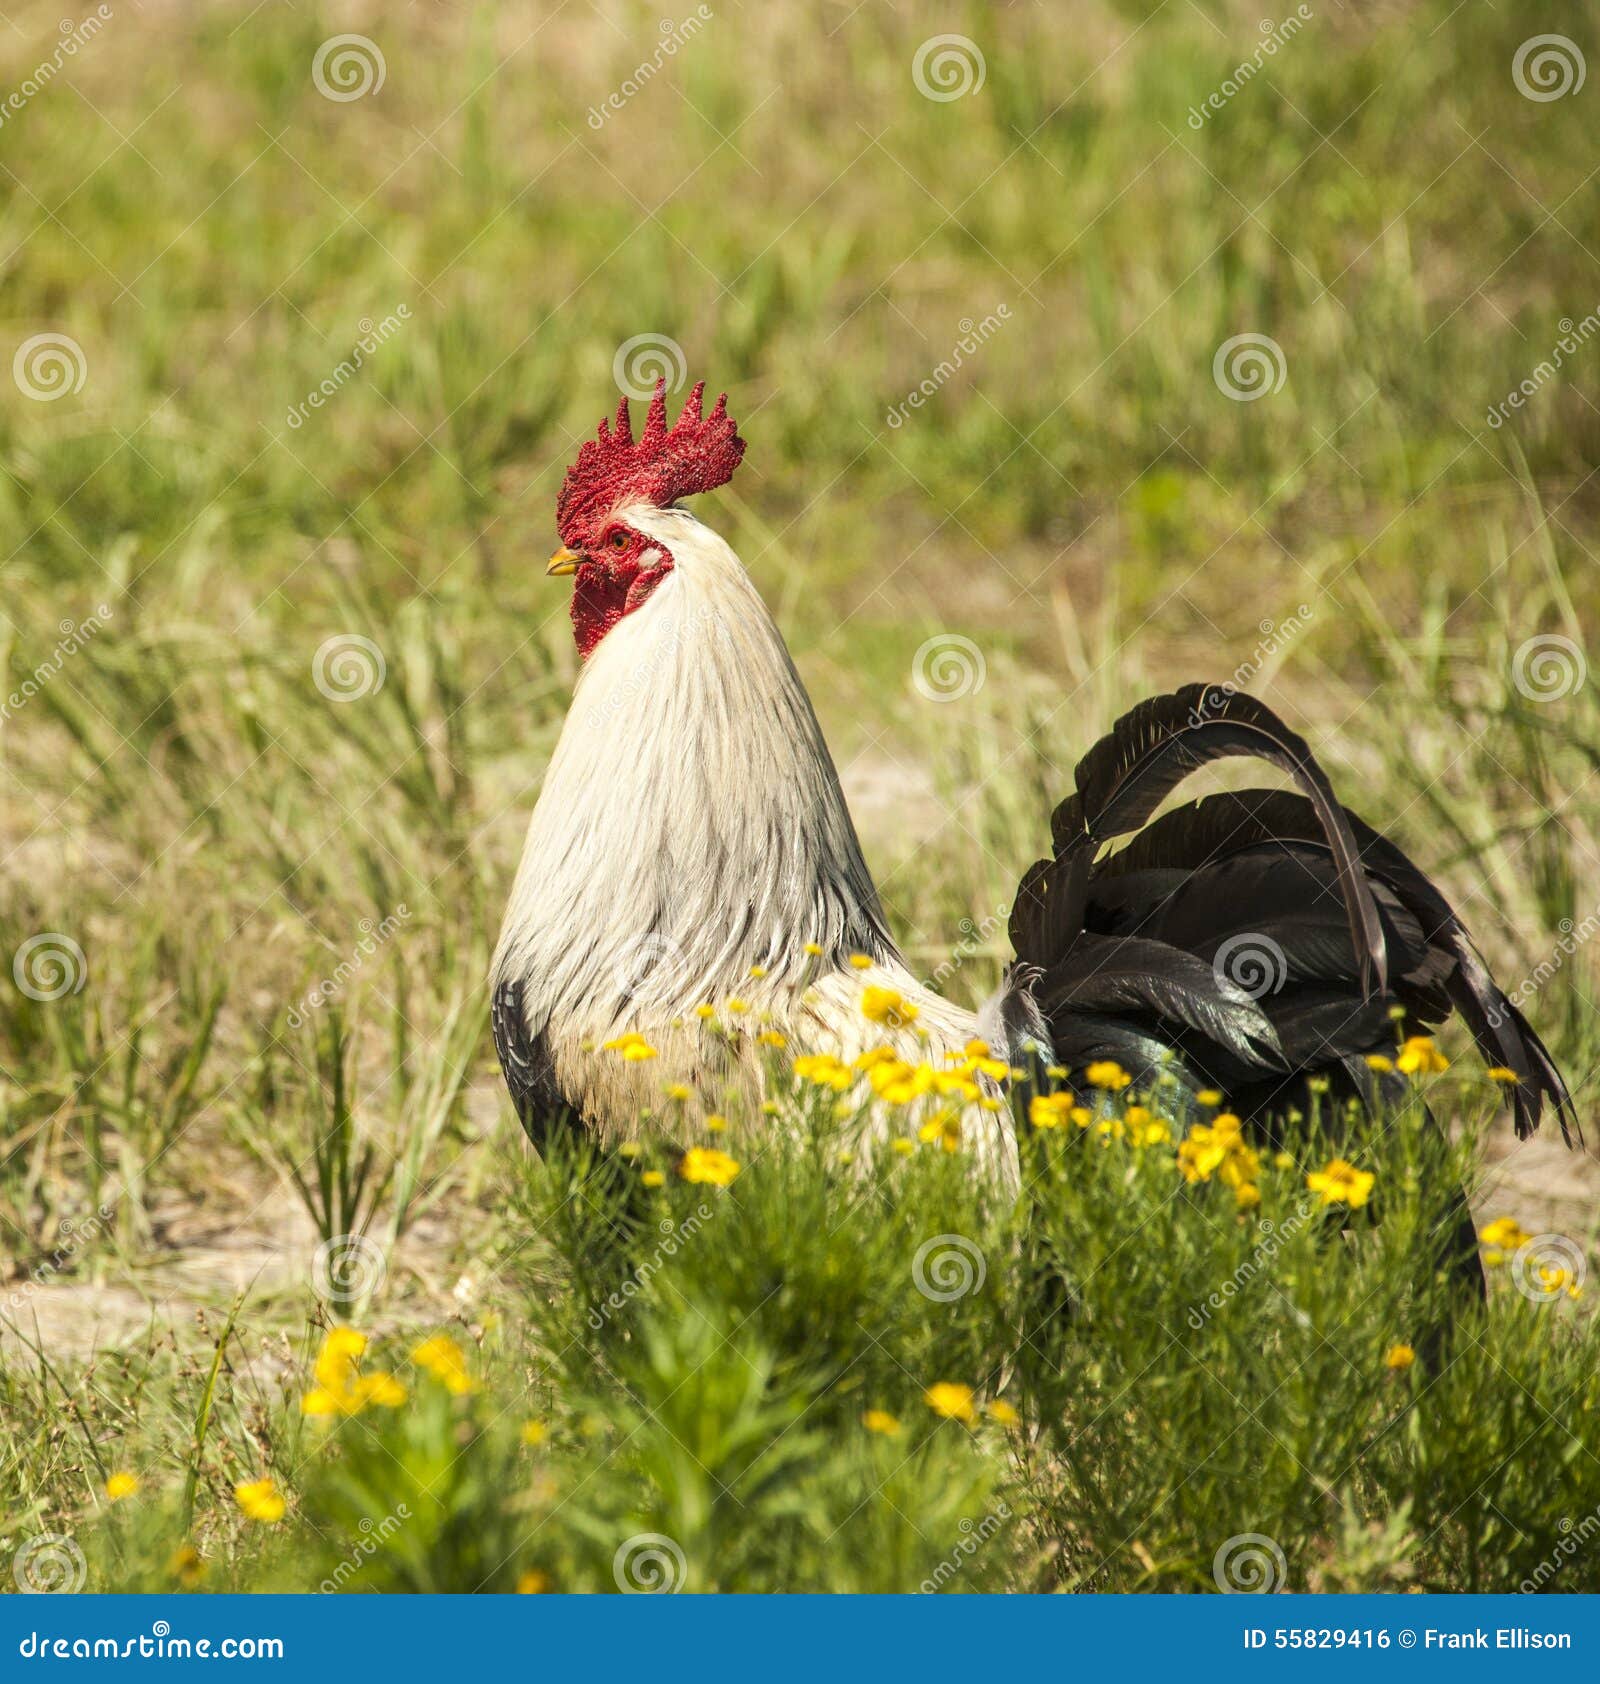 Rooster tail stock photo. Image of rosters, walking, farm - 55829416